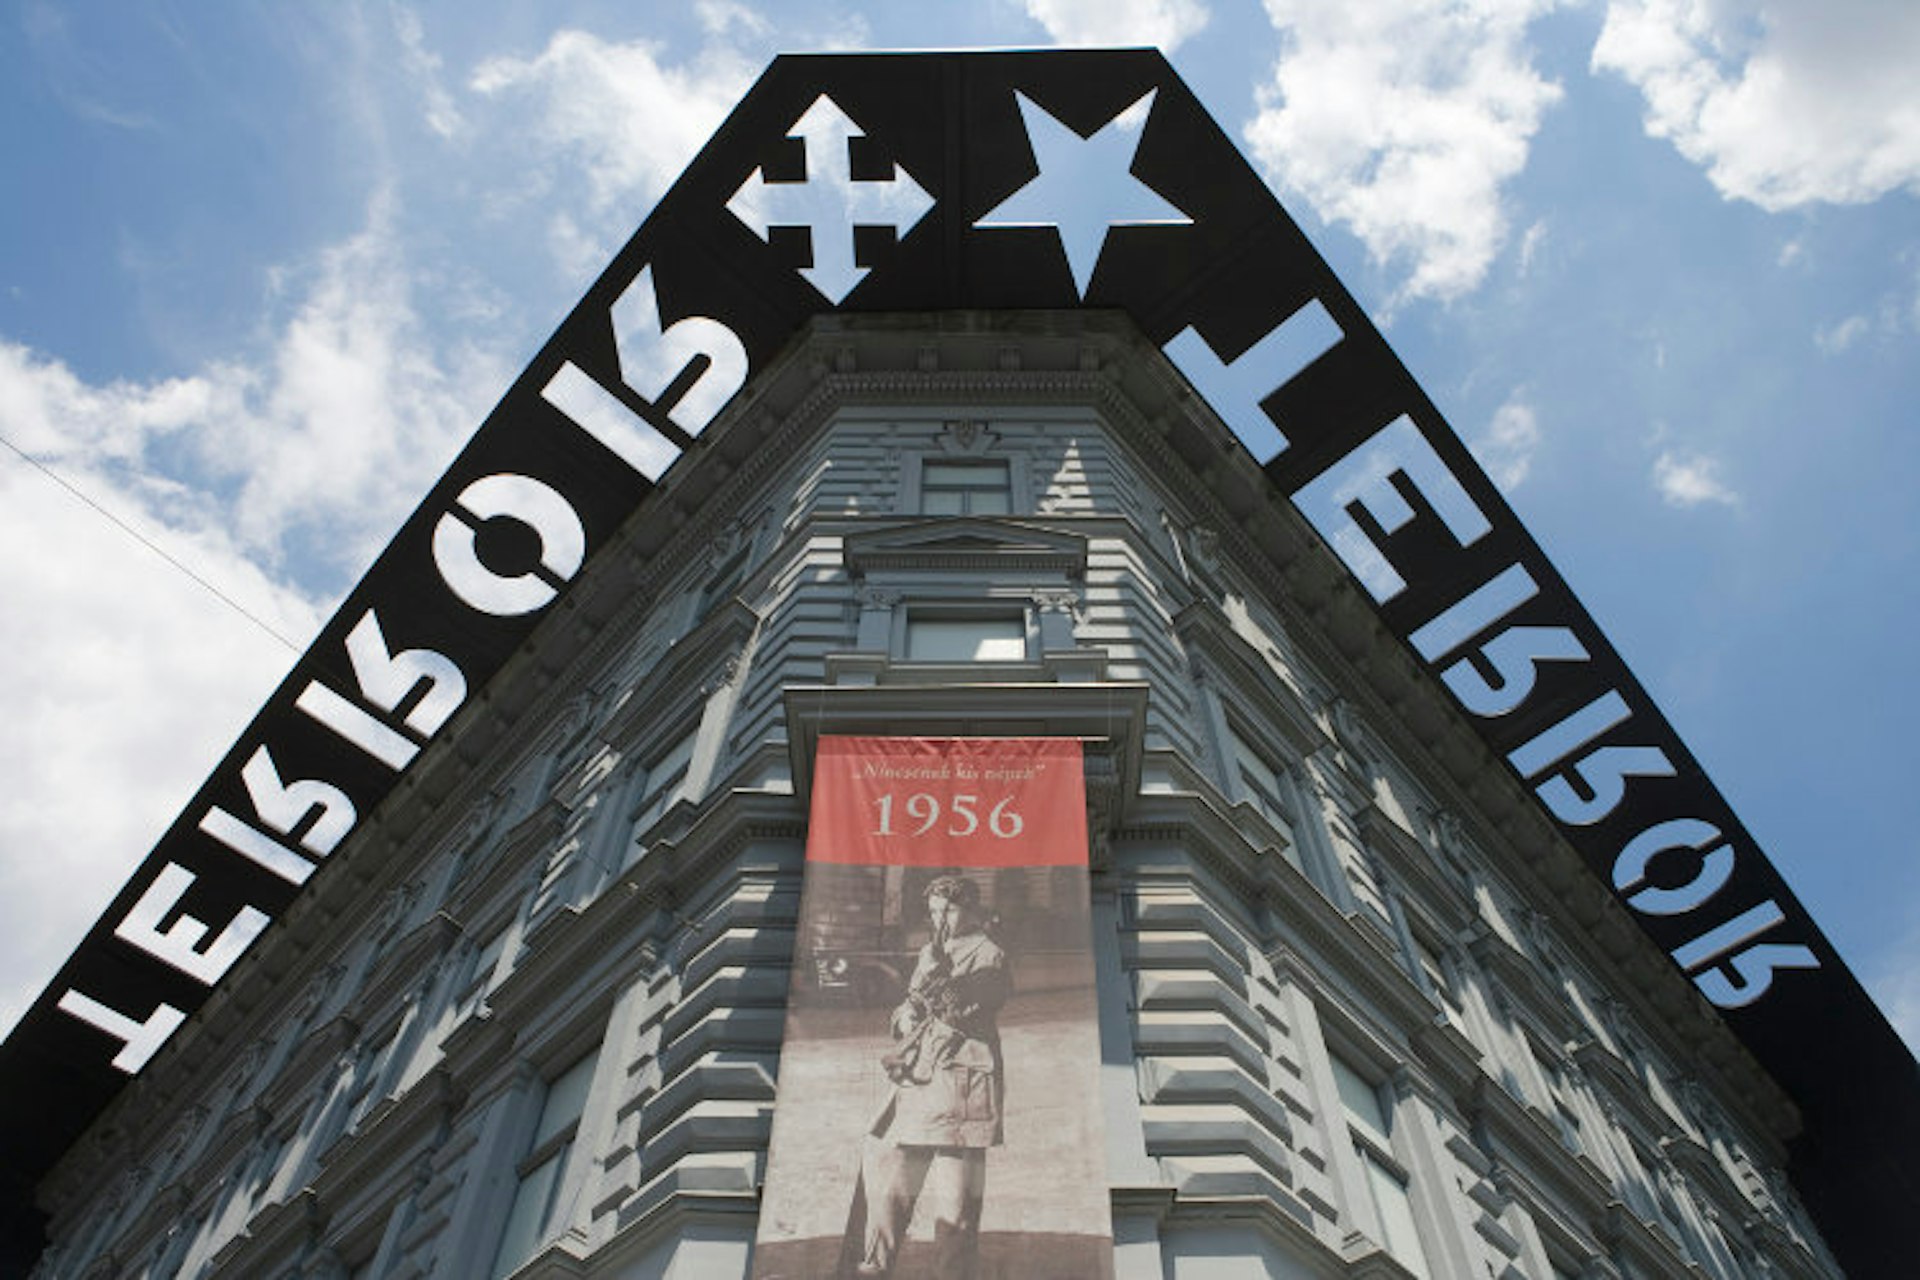 House of Terror museum on Andrássy út in Budapest. Image by Holger Leue / Getty Images